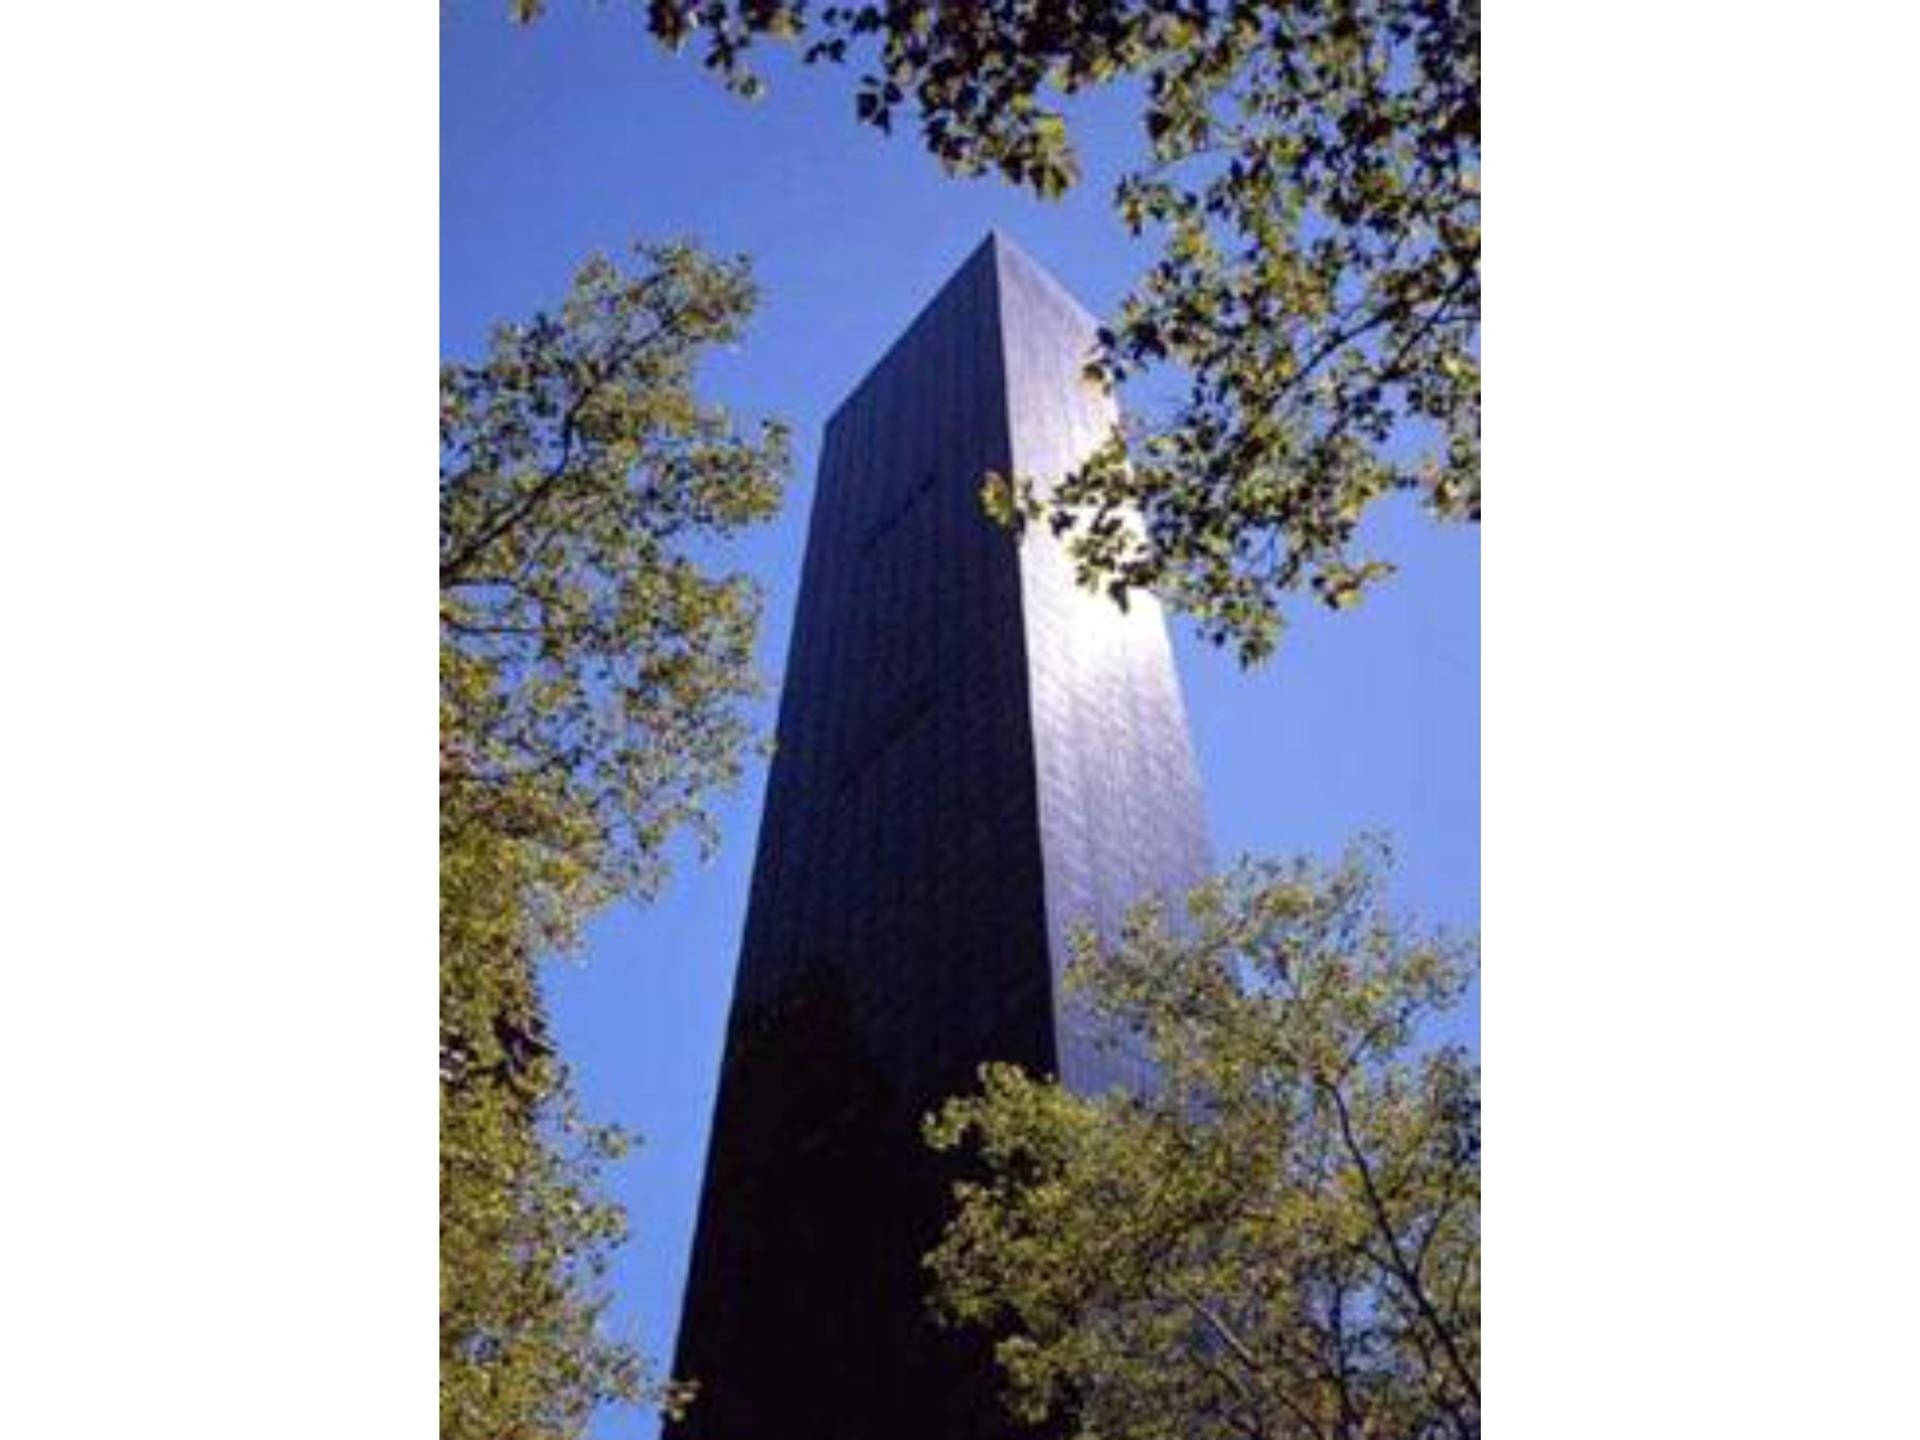 23. Condominiums for Sale at Trump World Tower, 845 UNITED NATIONS PLZ, 75C Turtle Bay, New York, NY 10017